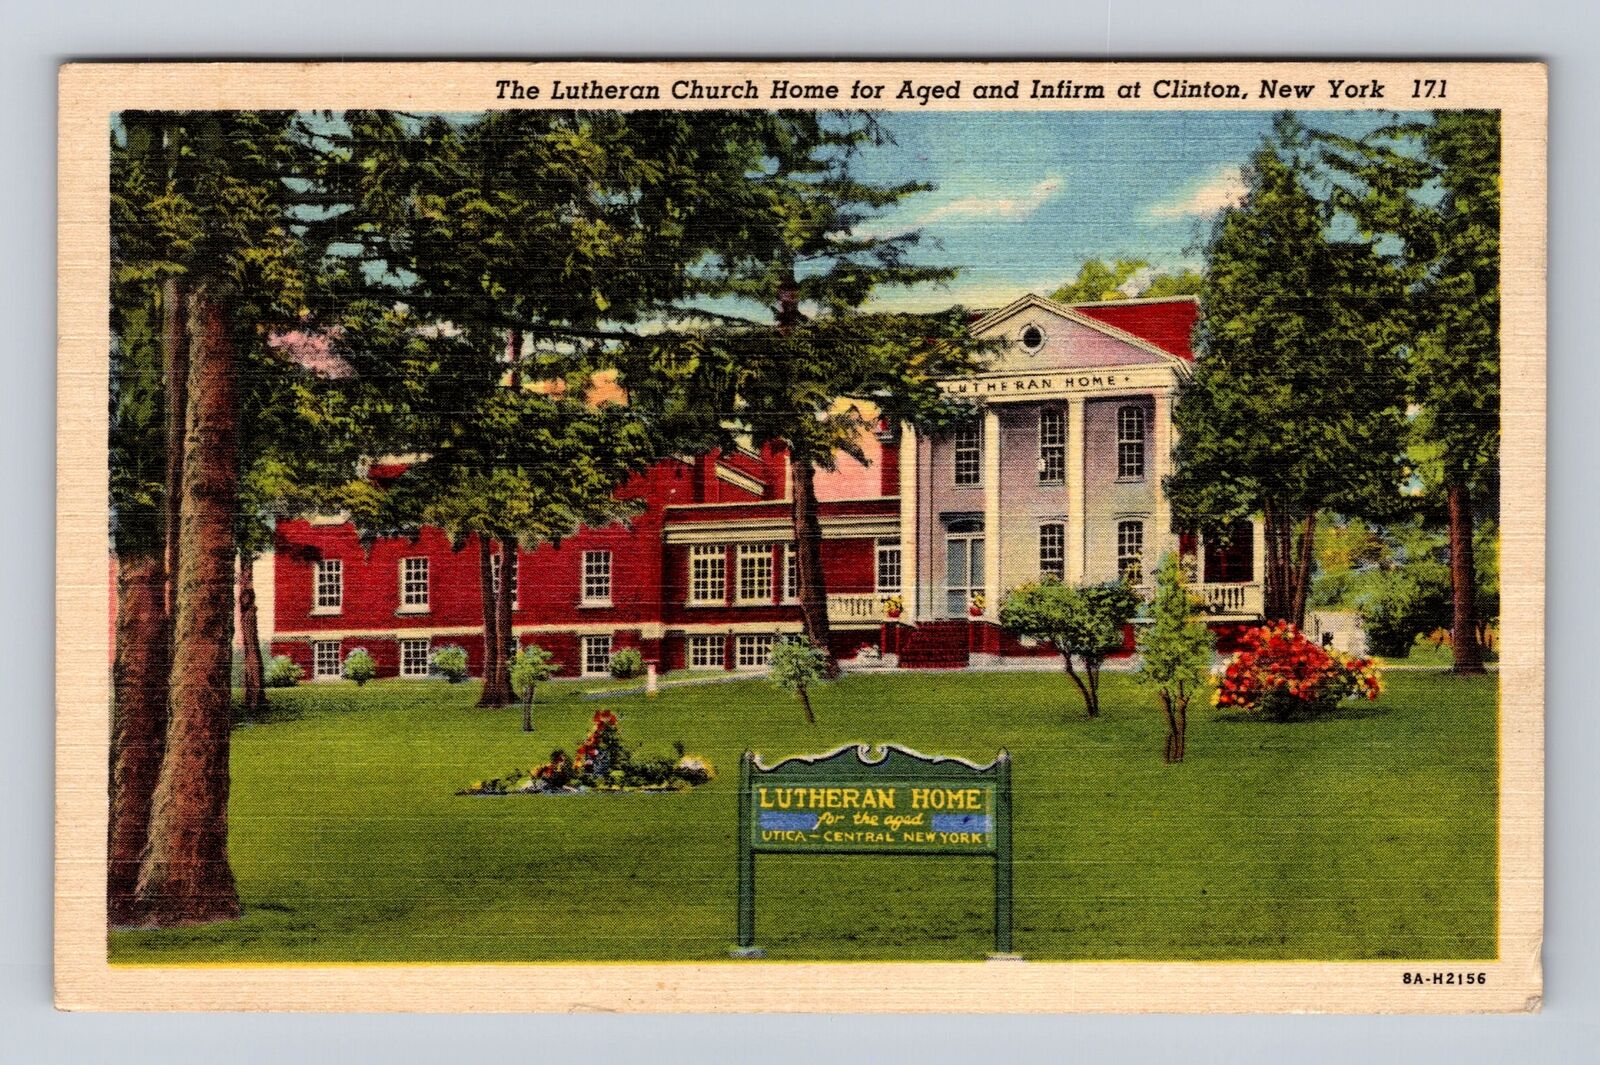 Clinton NY-New York, Lutheran Church Home for Aged, Vintage c1955 Postcard